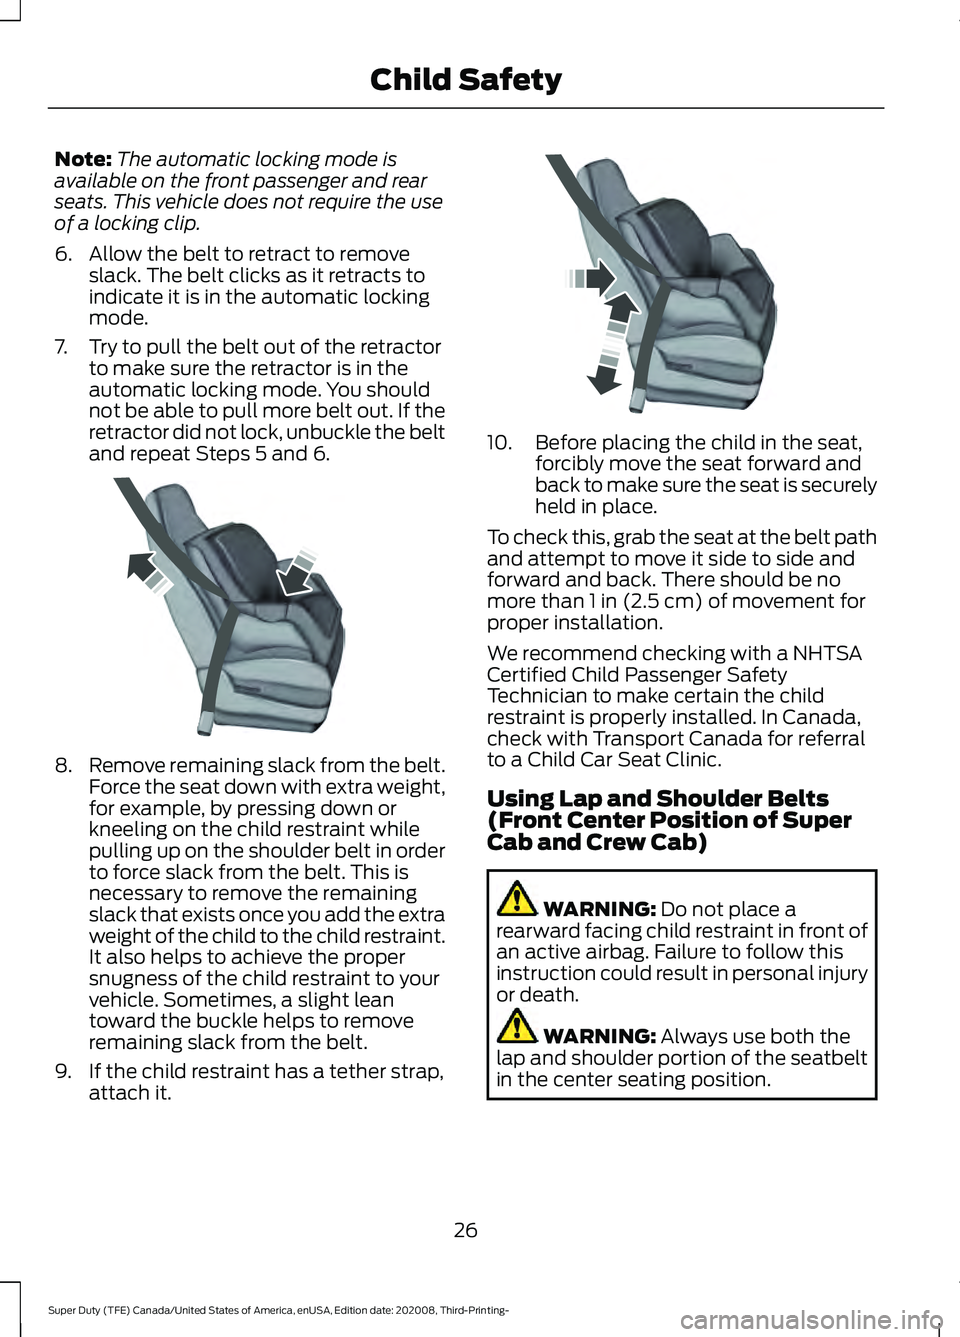 FORD F-600 2021  Owners Manual Note:
The automatic locking mode is
available on the front passenger and rear
seats. This vehicle does not require the use
of a locking clip.
6. Allow the belt to retract to remove slack. The belt cli